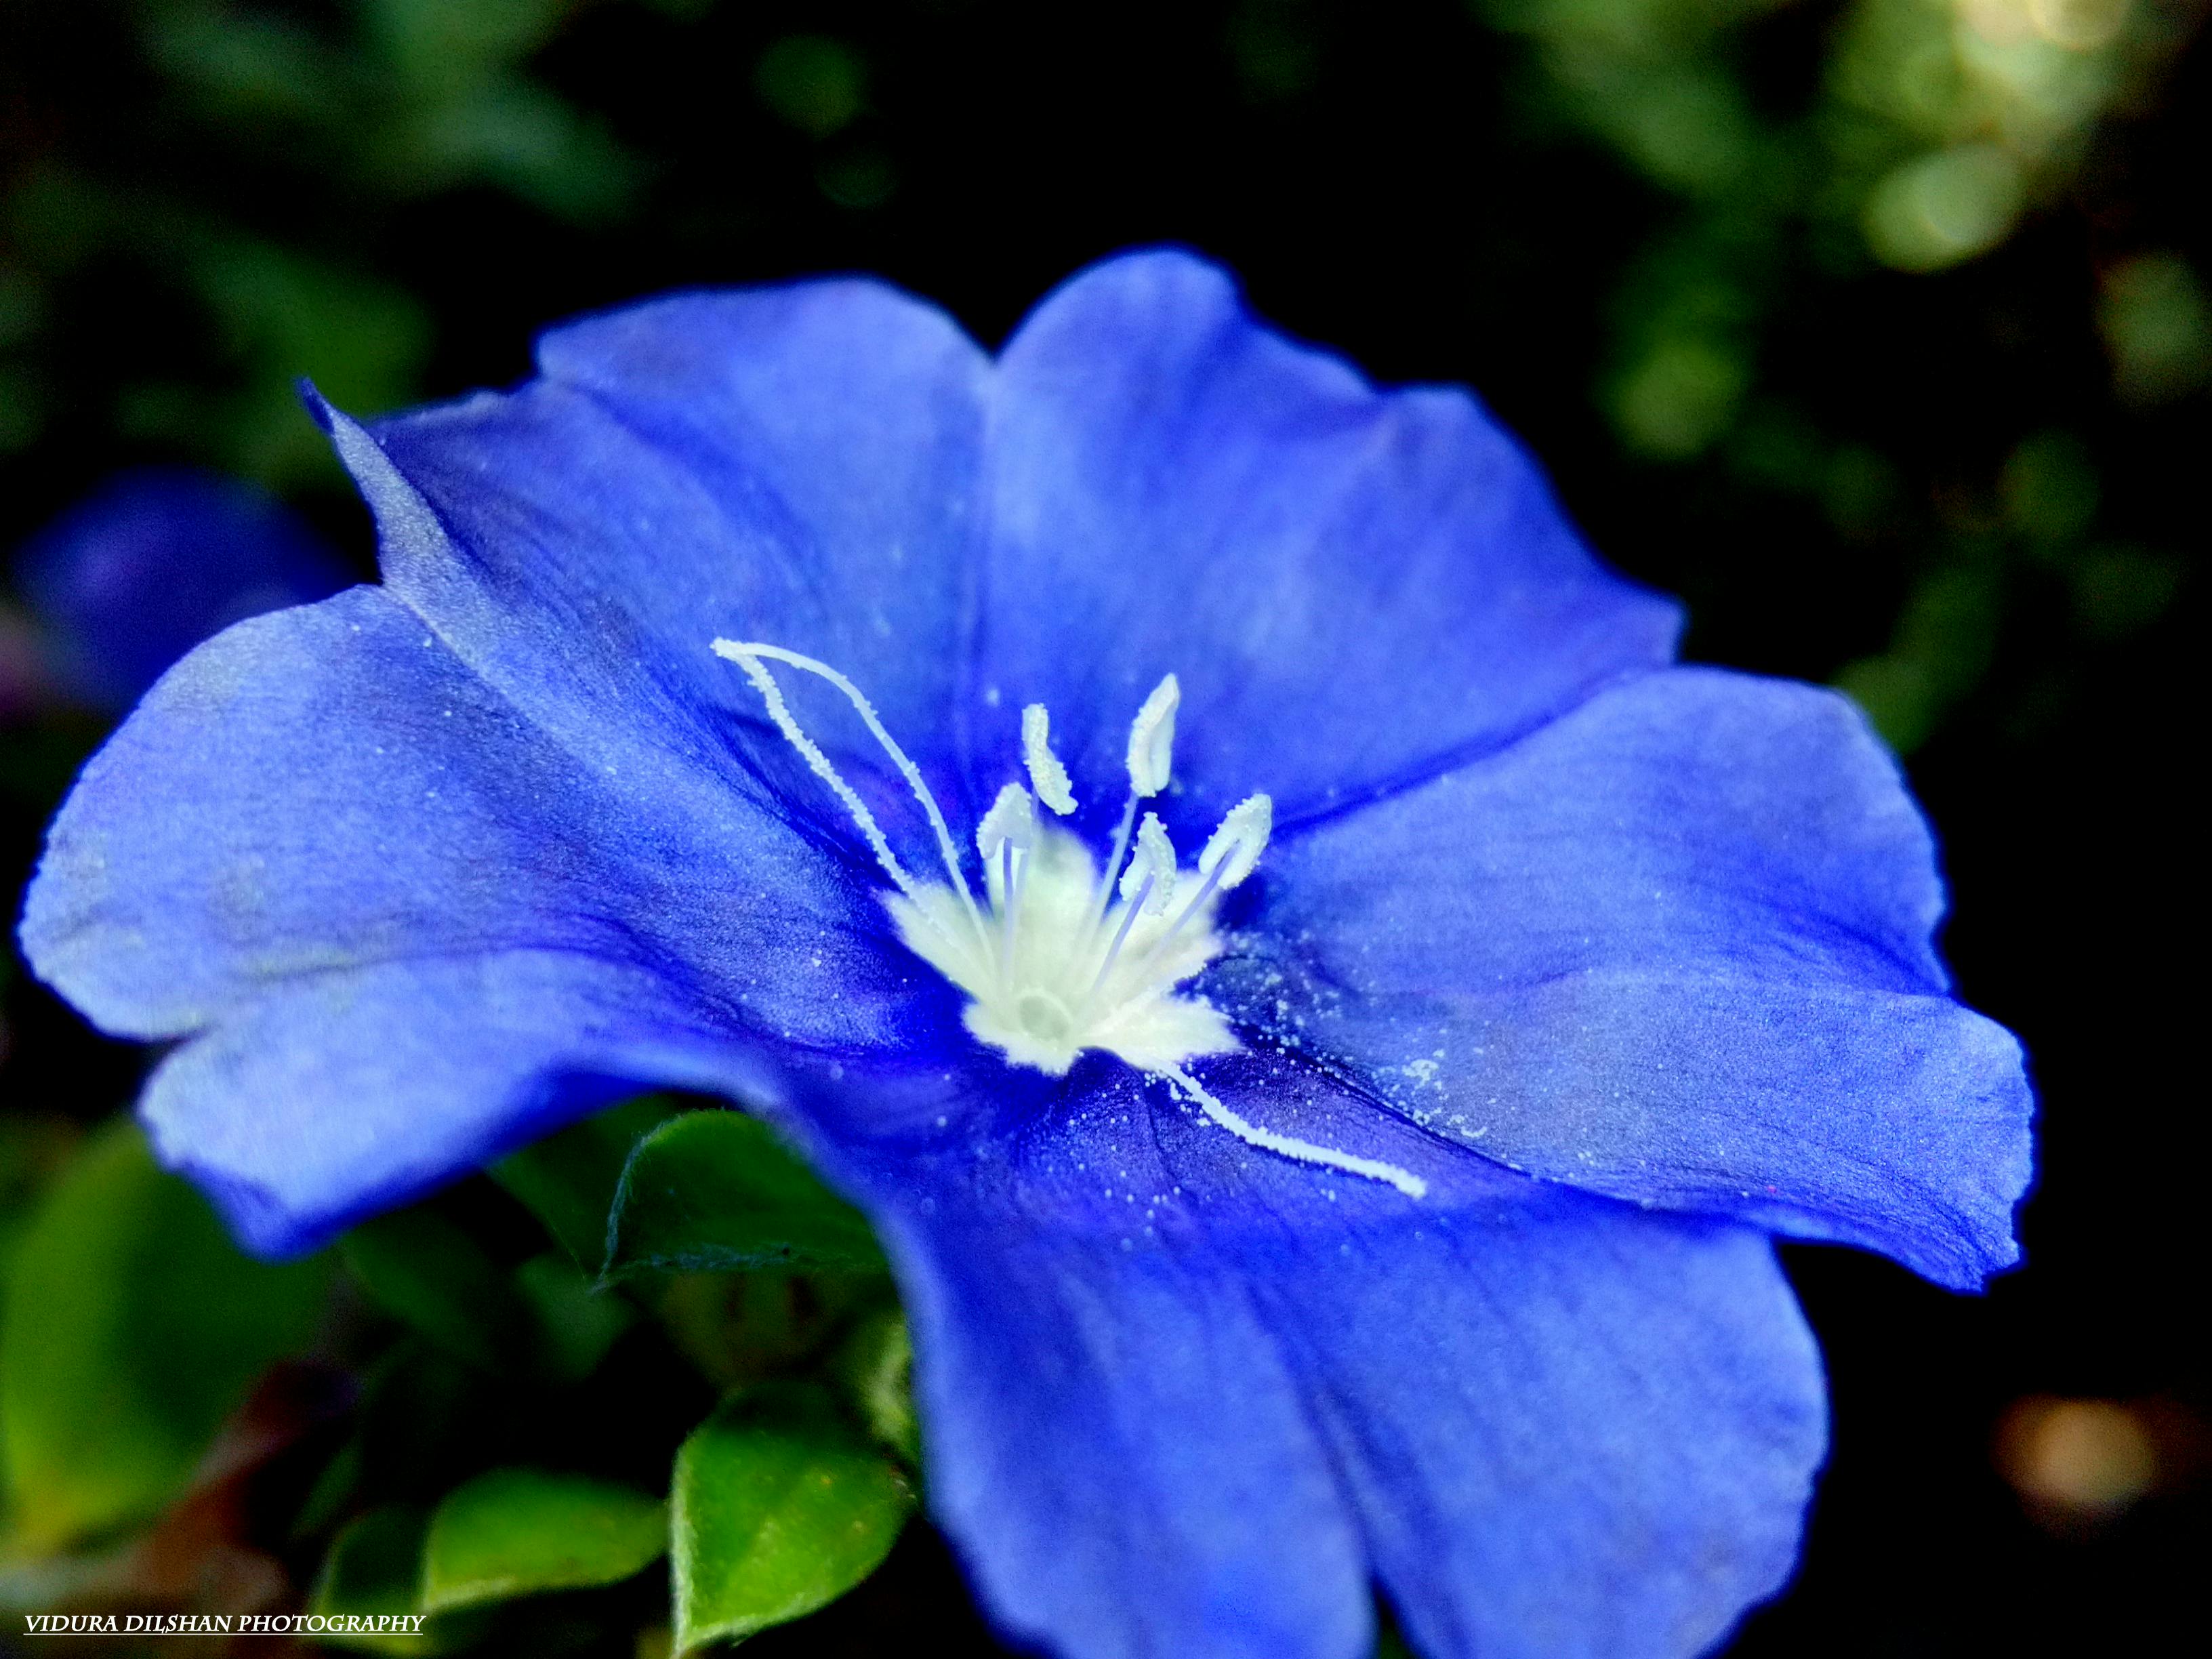 Free stock photo of #Flower #Blue #Nature #Cool #Morning